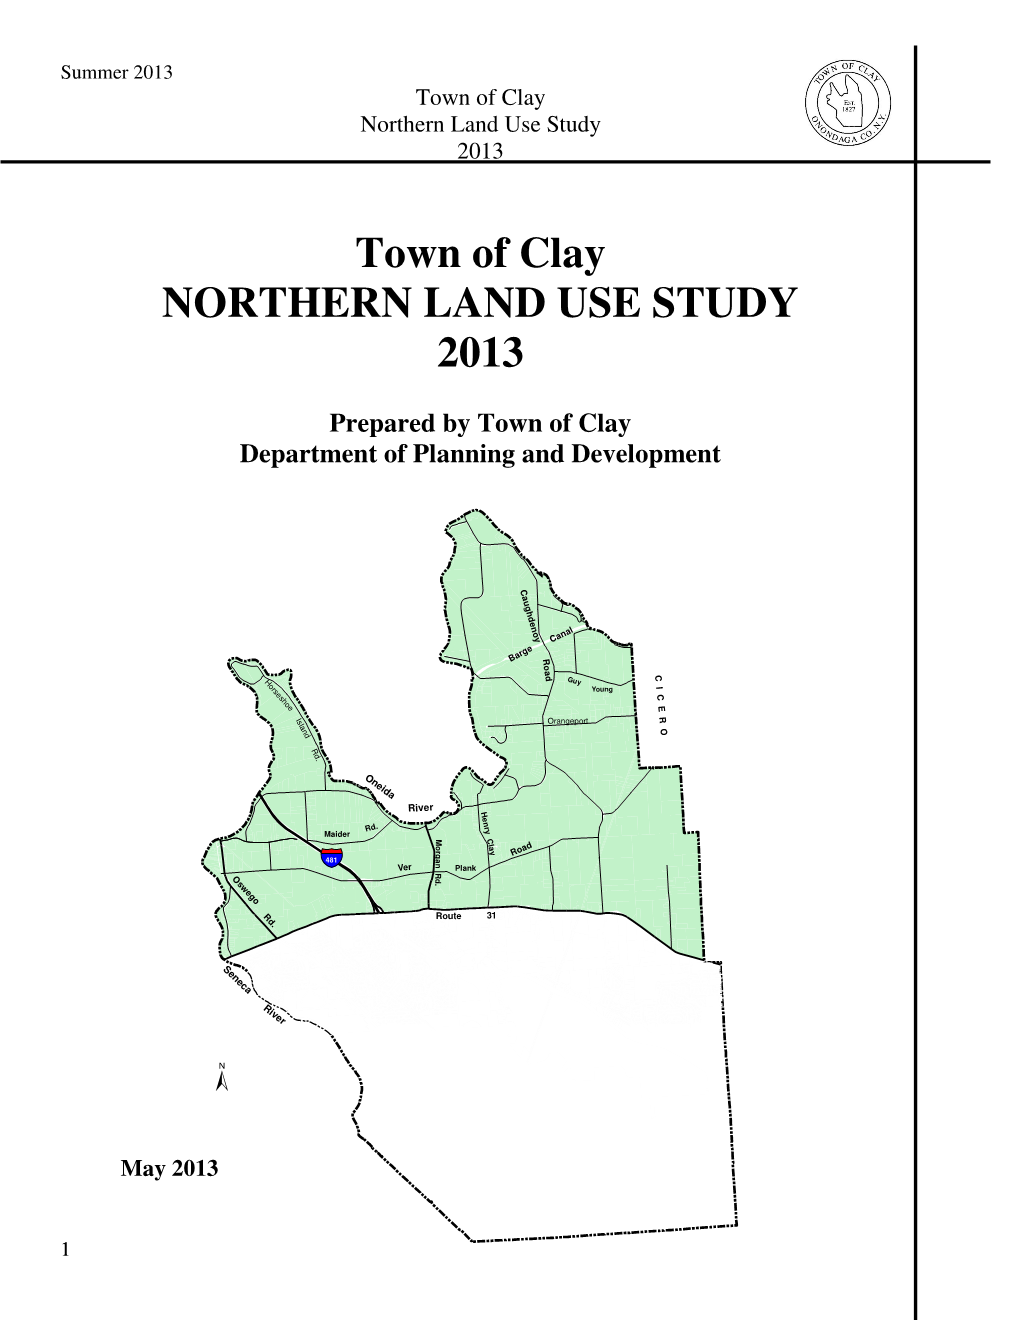 Town of Clay Northern Land Use Study 2013